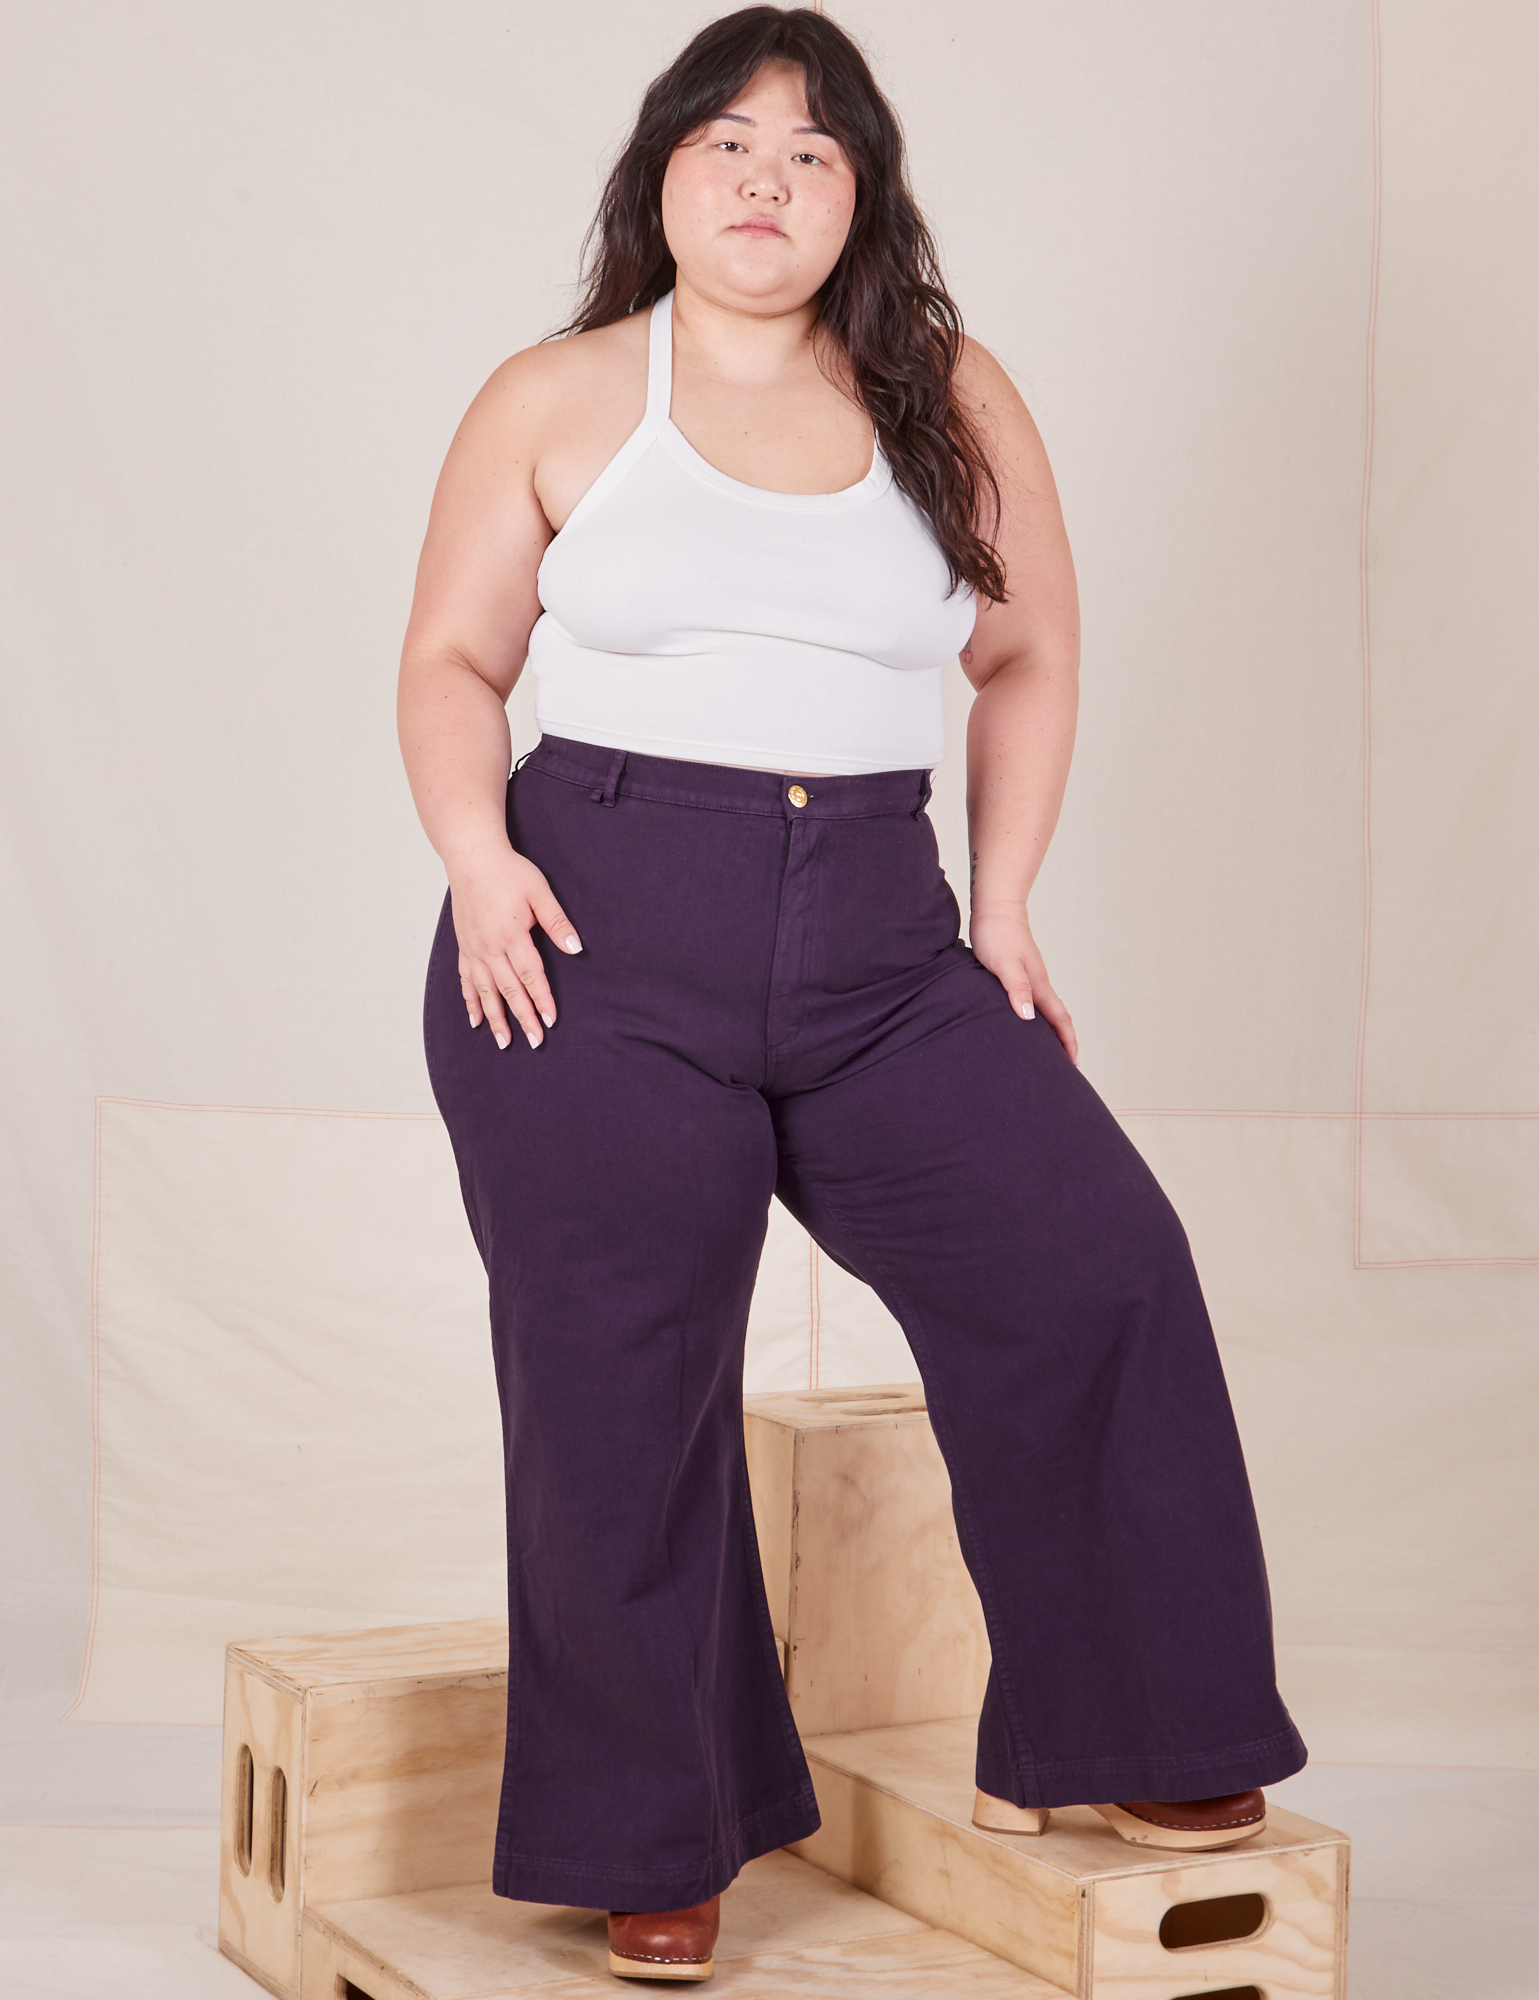 Ashley is 5'7" and wearing 1XL Bell Bottoms in Nebula Purple paired with vintage off-white Halter Top